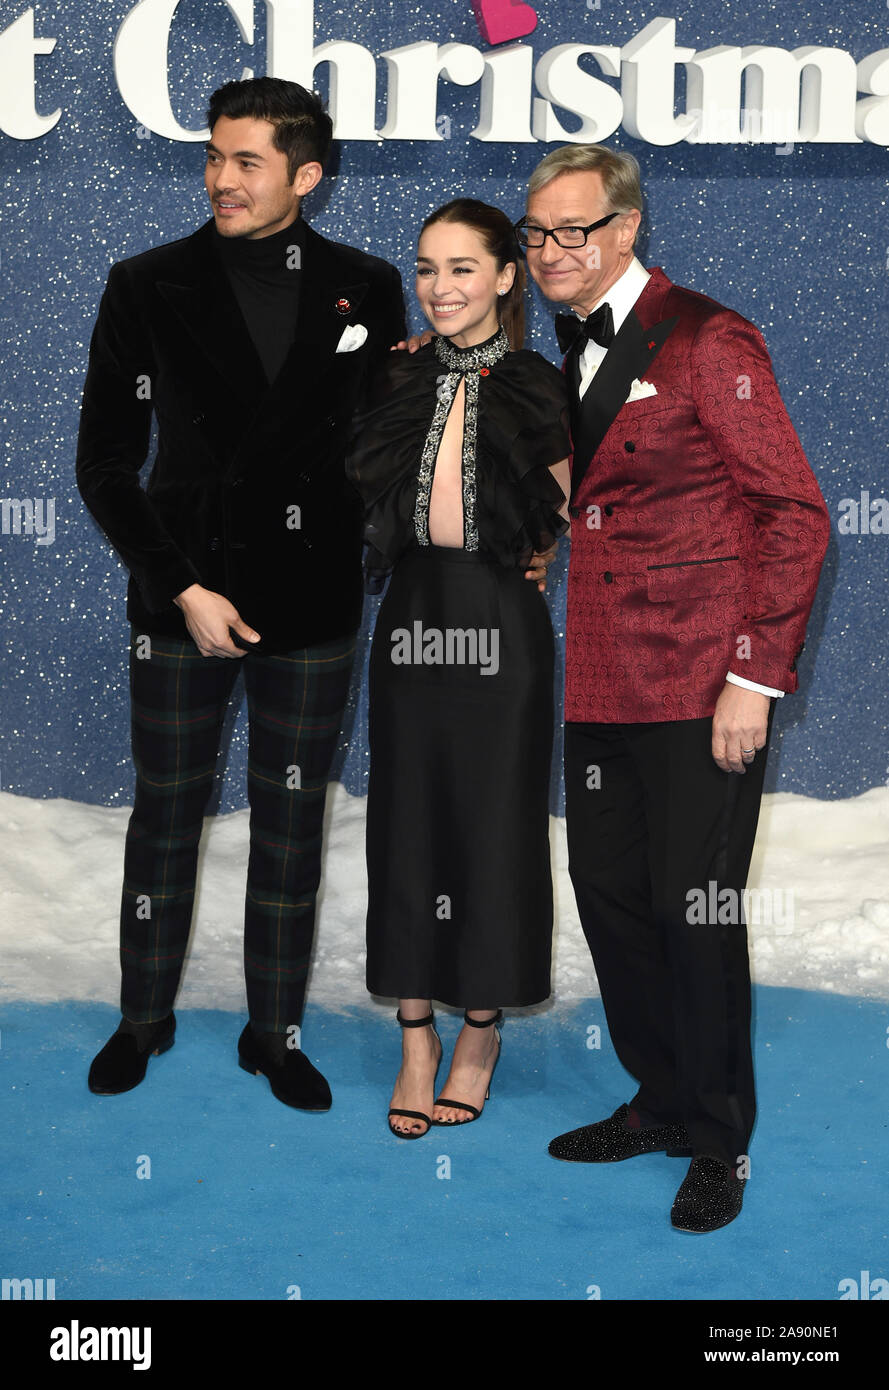 Photo Must Be Credited ©Alpha Press 079965 11/11/2019 Henry Golding and Emilia Clarke Paul Feig Last Christmas UK Premiere At BFI Southbank London Stock Photo